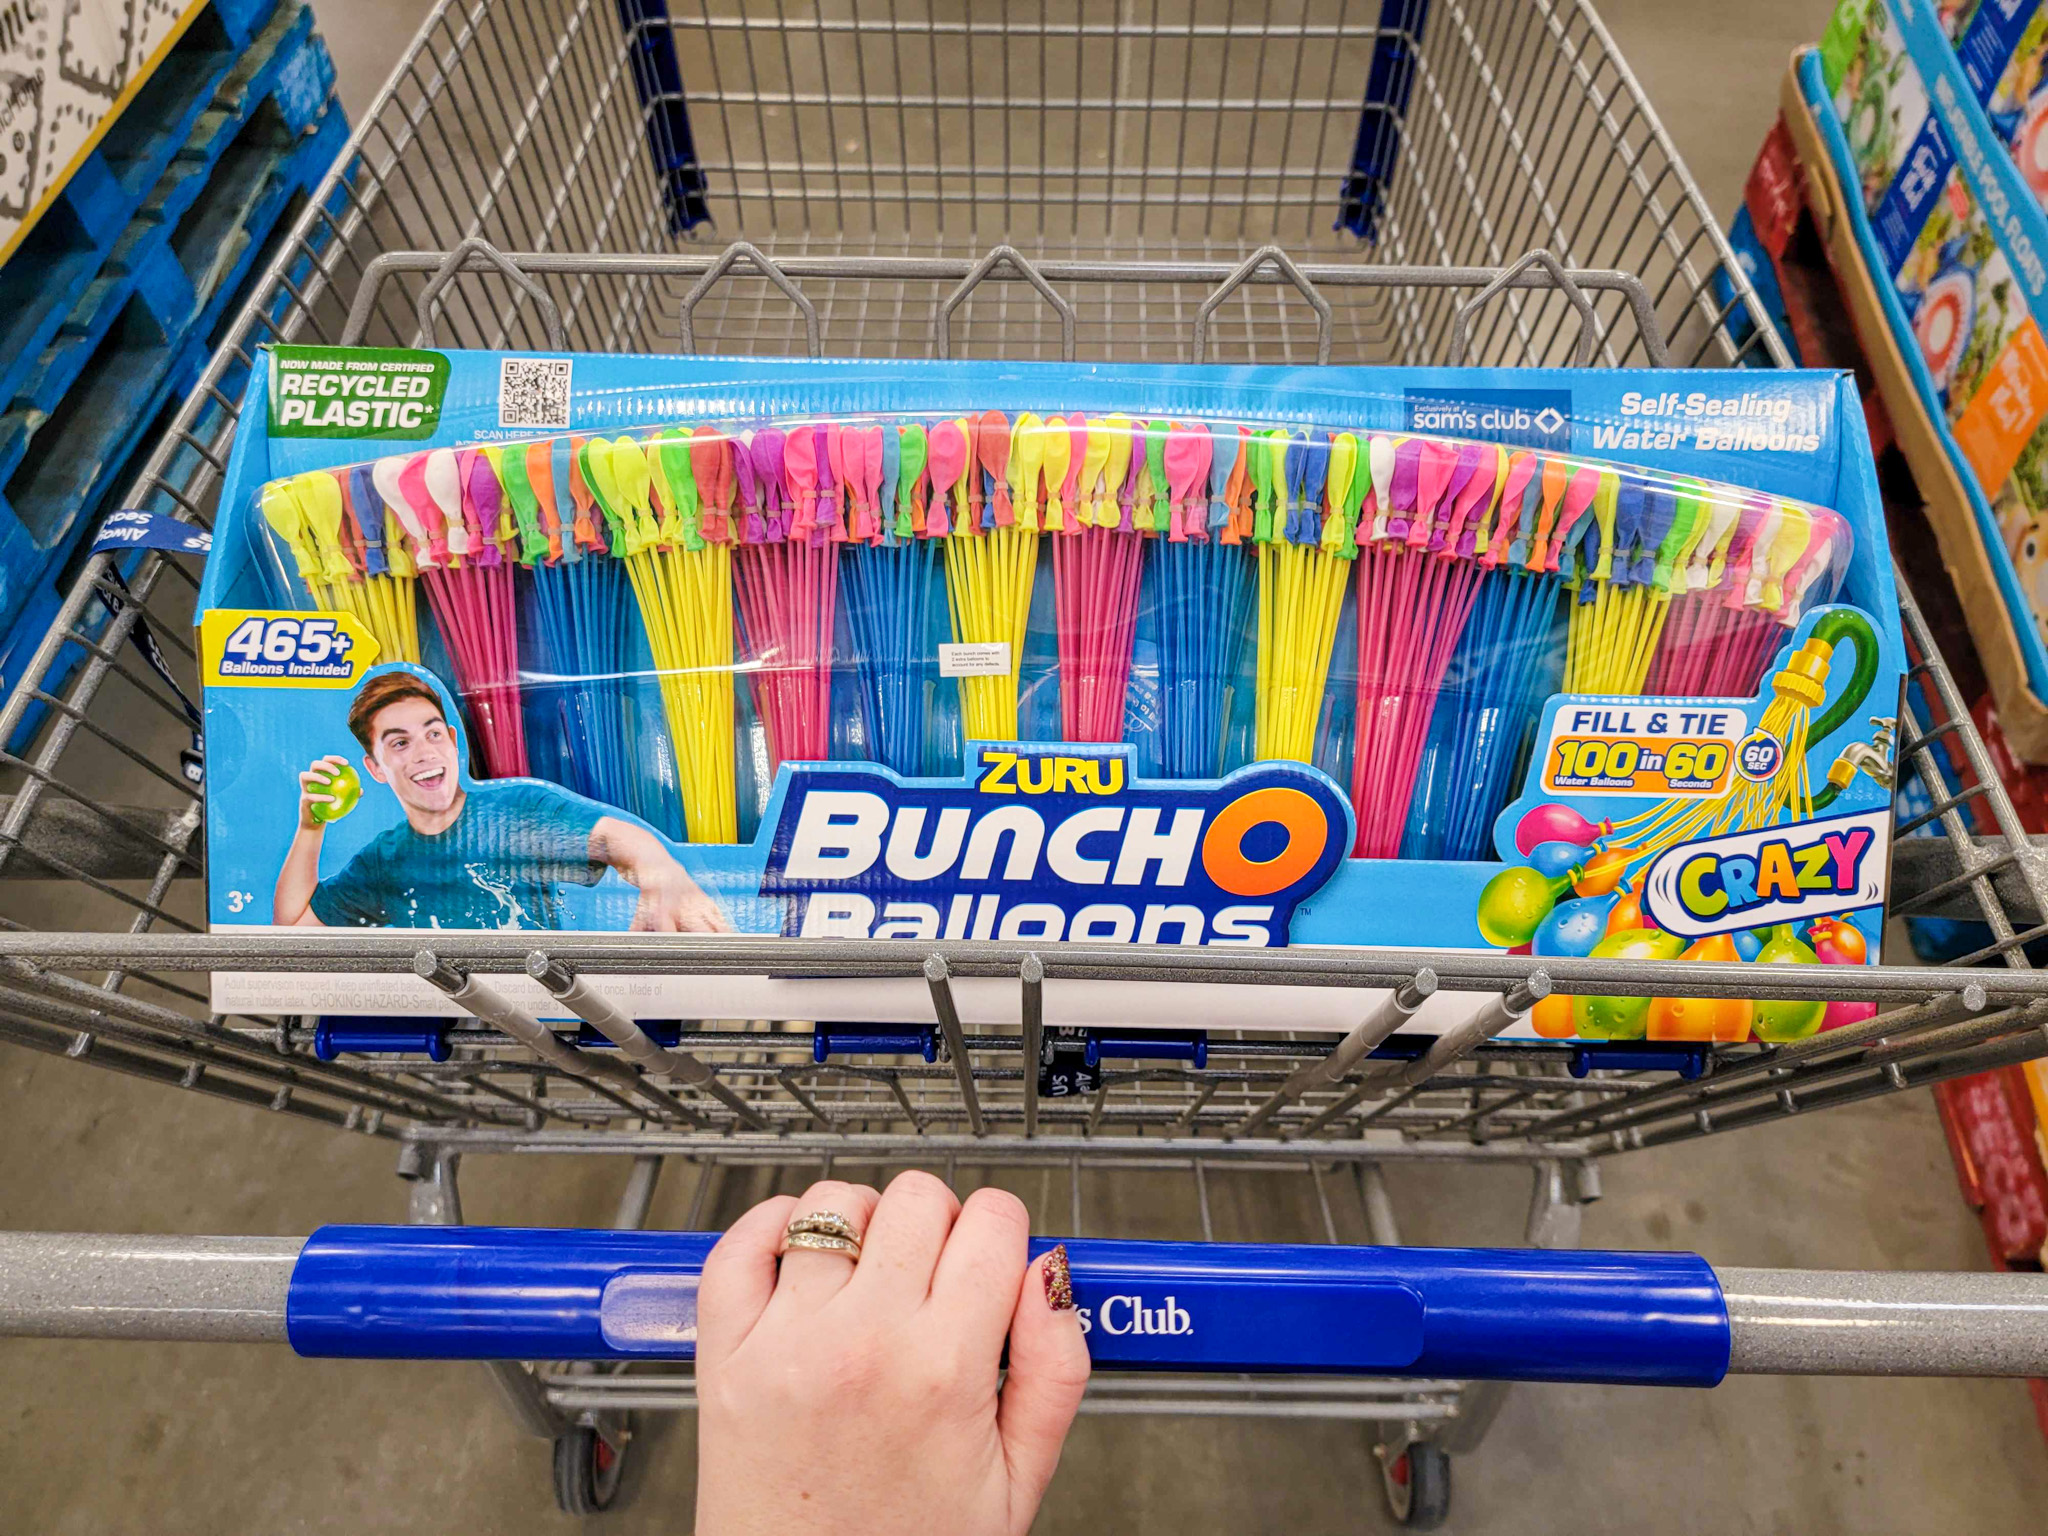 Bunch O Balloons 465-Count, Only $ at Sam's Club - The Krazy Coupon  Lady